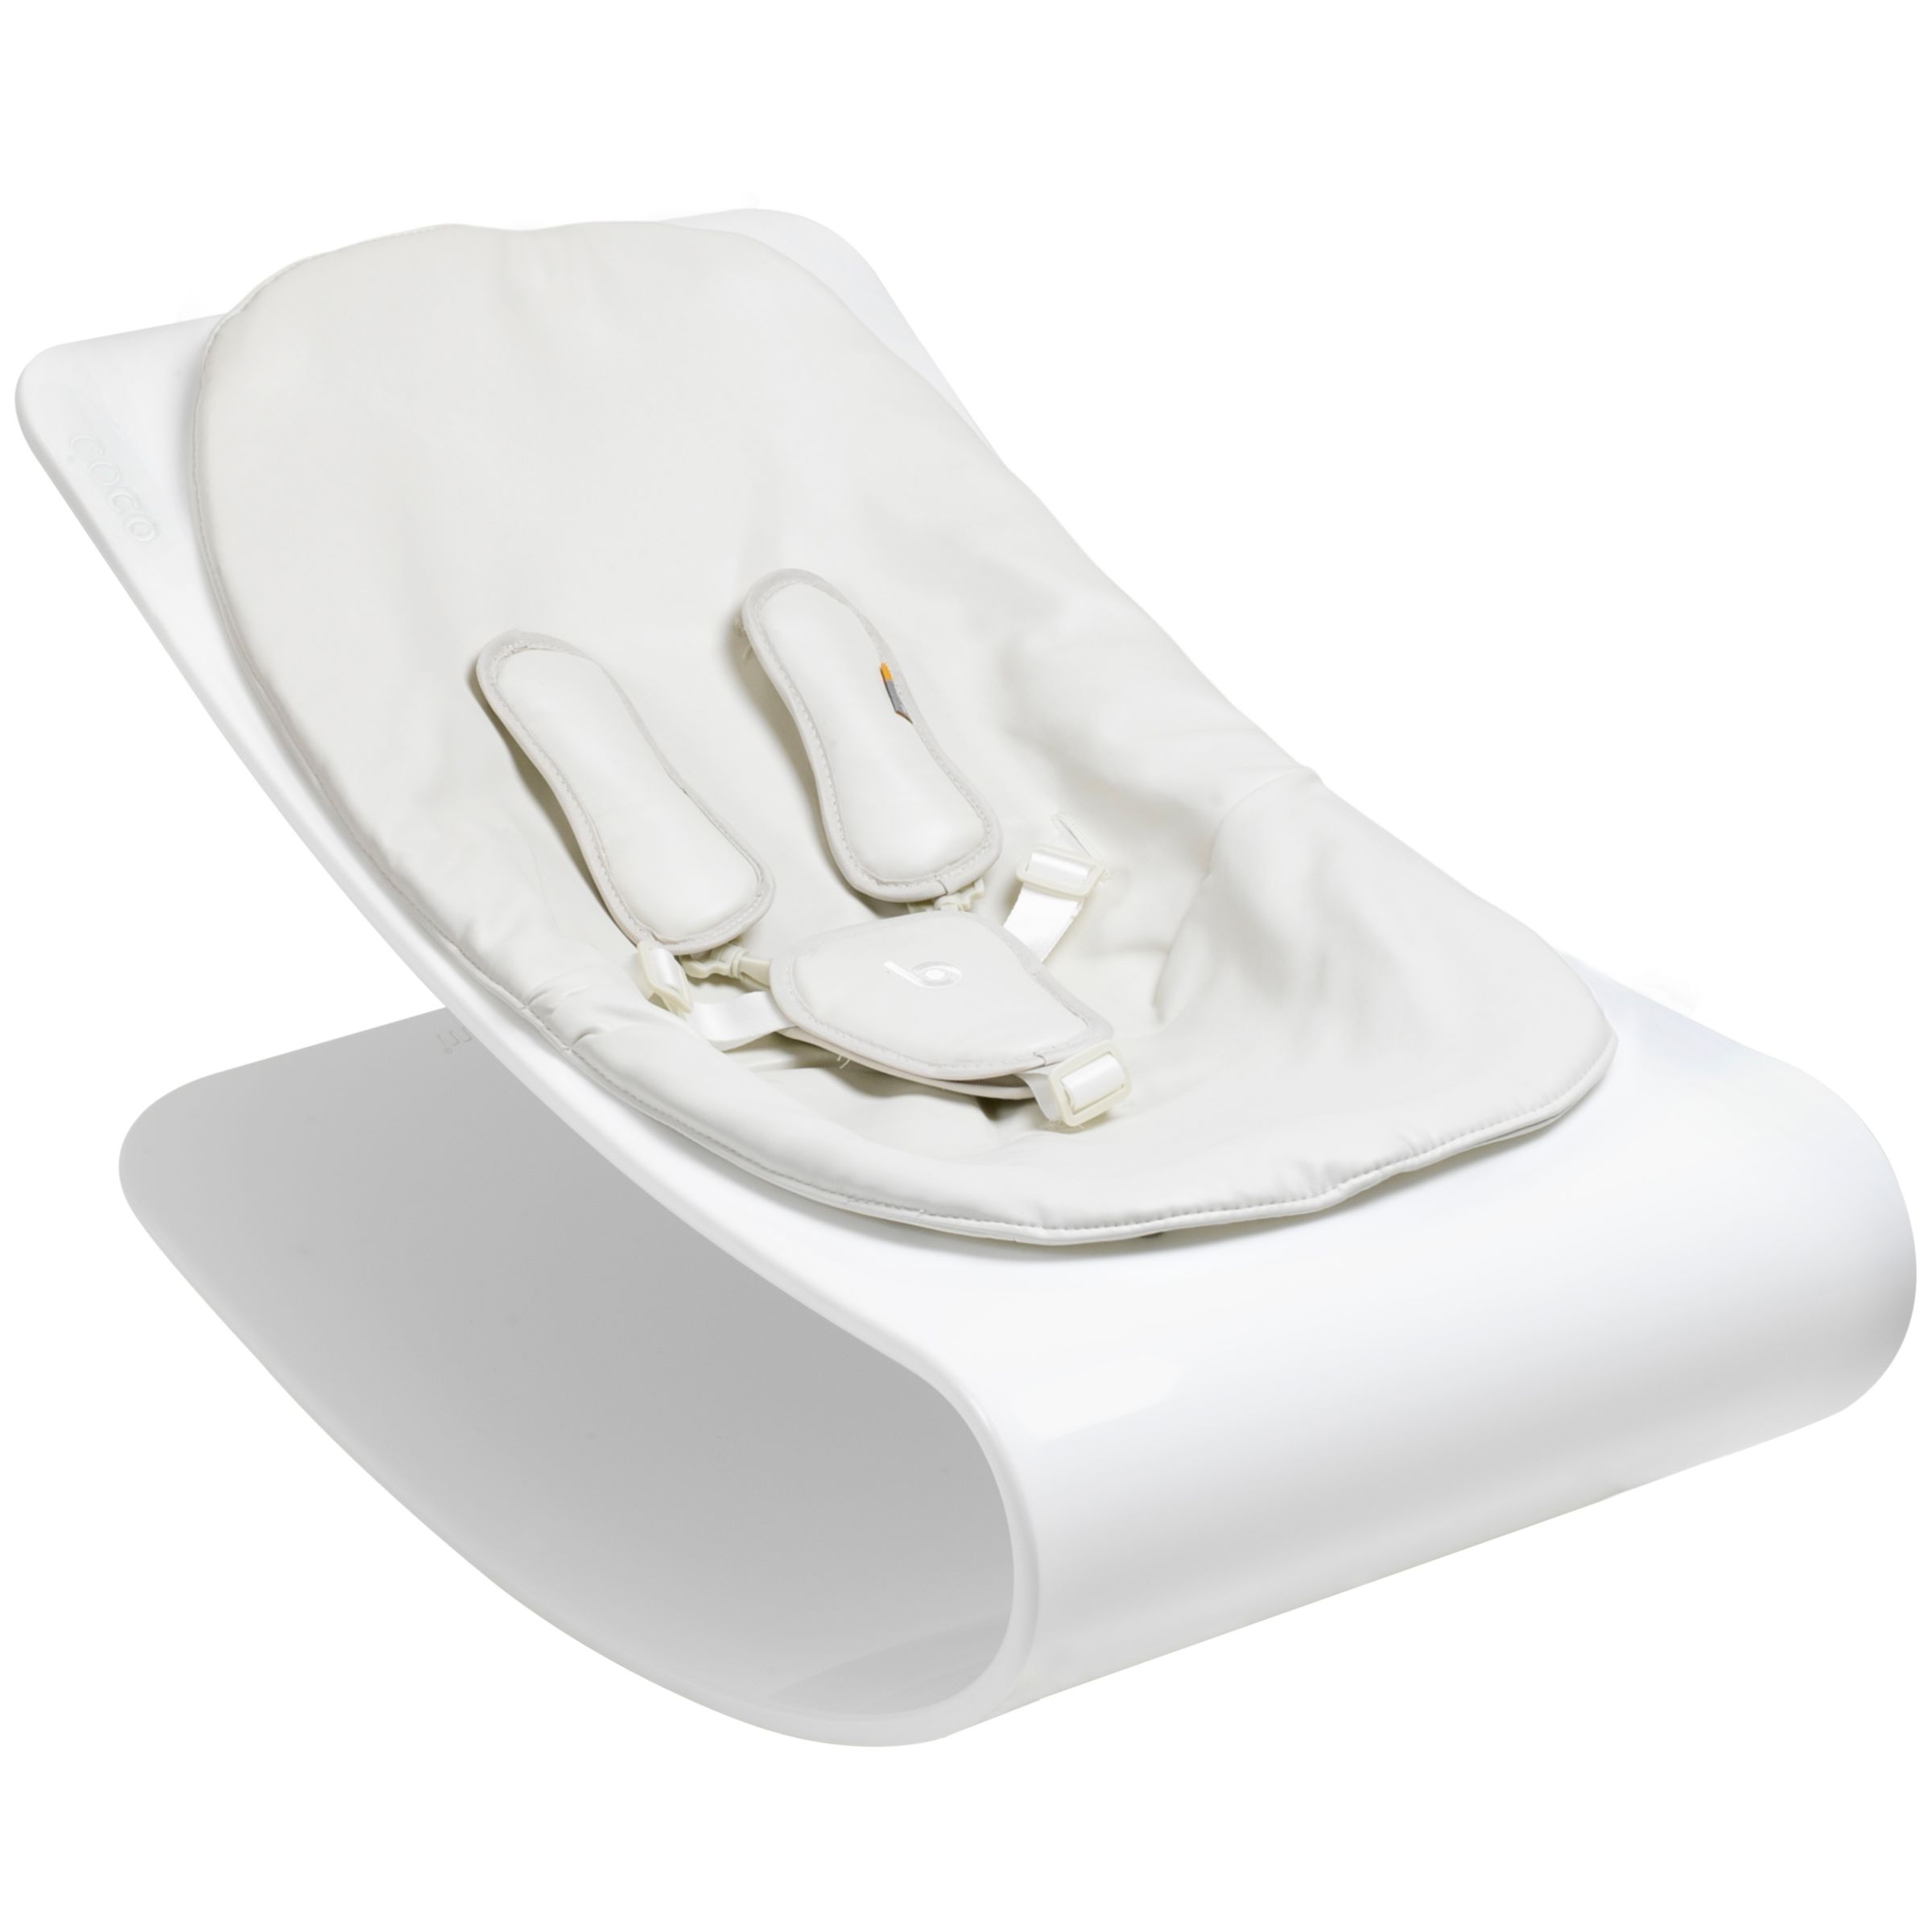 bloom Coco Plexistyle Baby Lounger, Ivory White with Coconut White at John Lewis